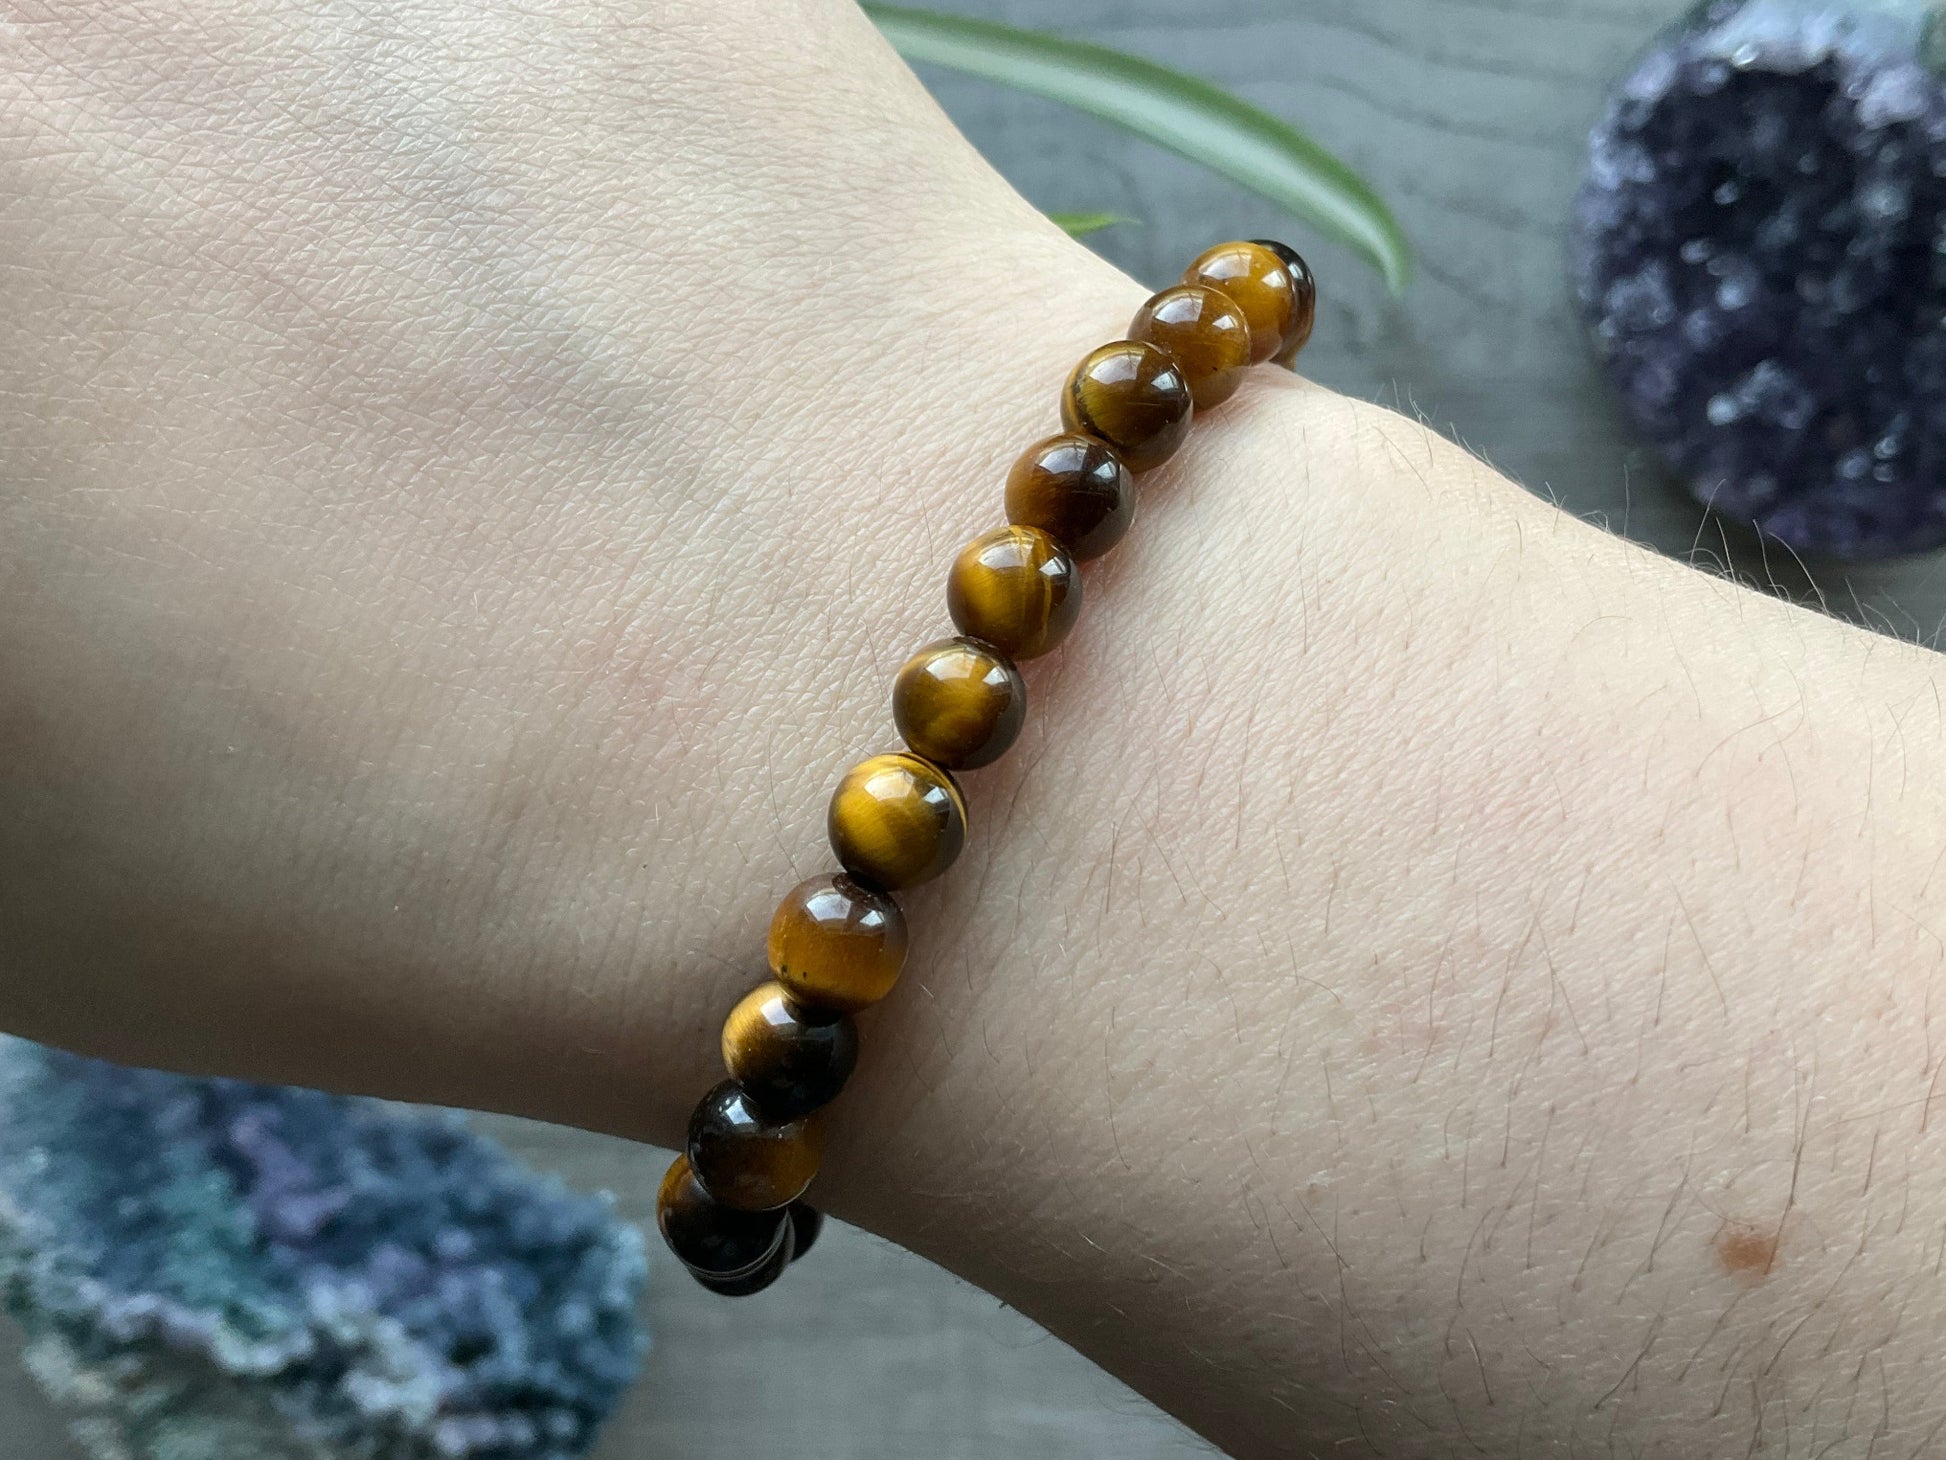 Pictured is a yellow tiger's eye bead bracelet.